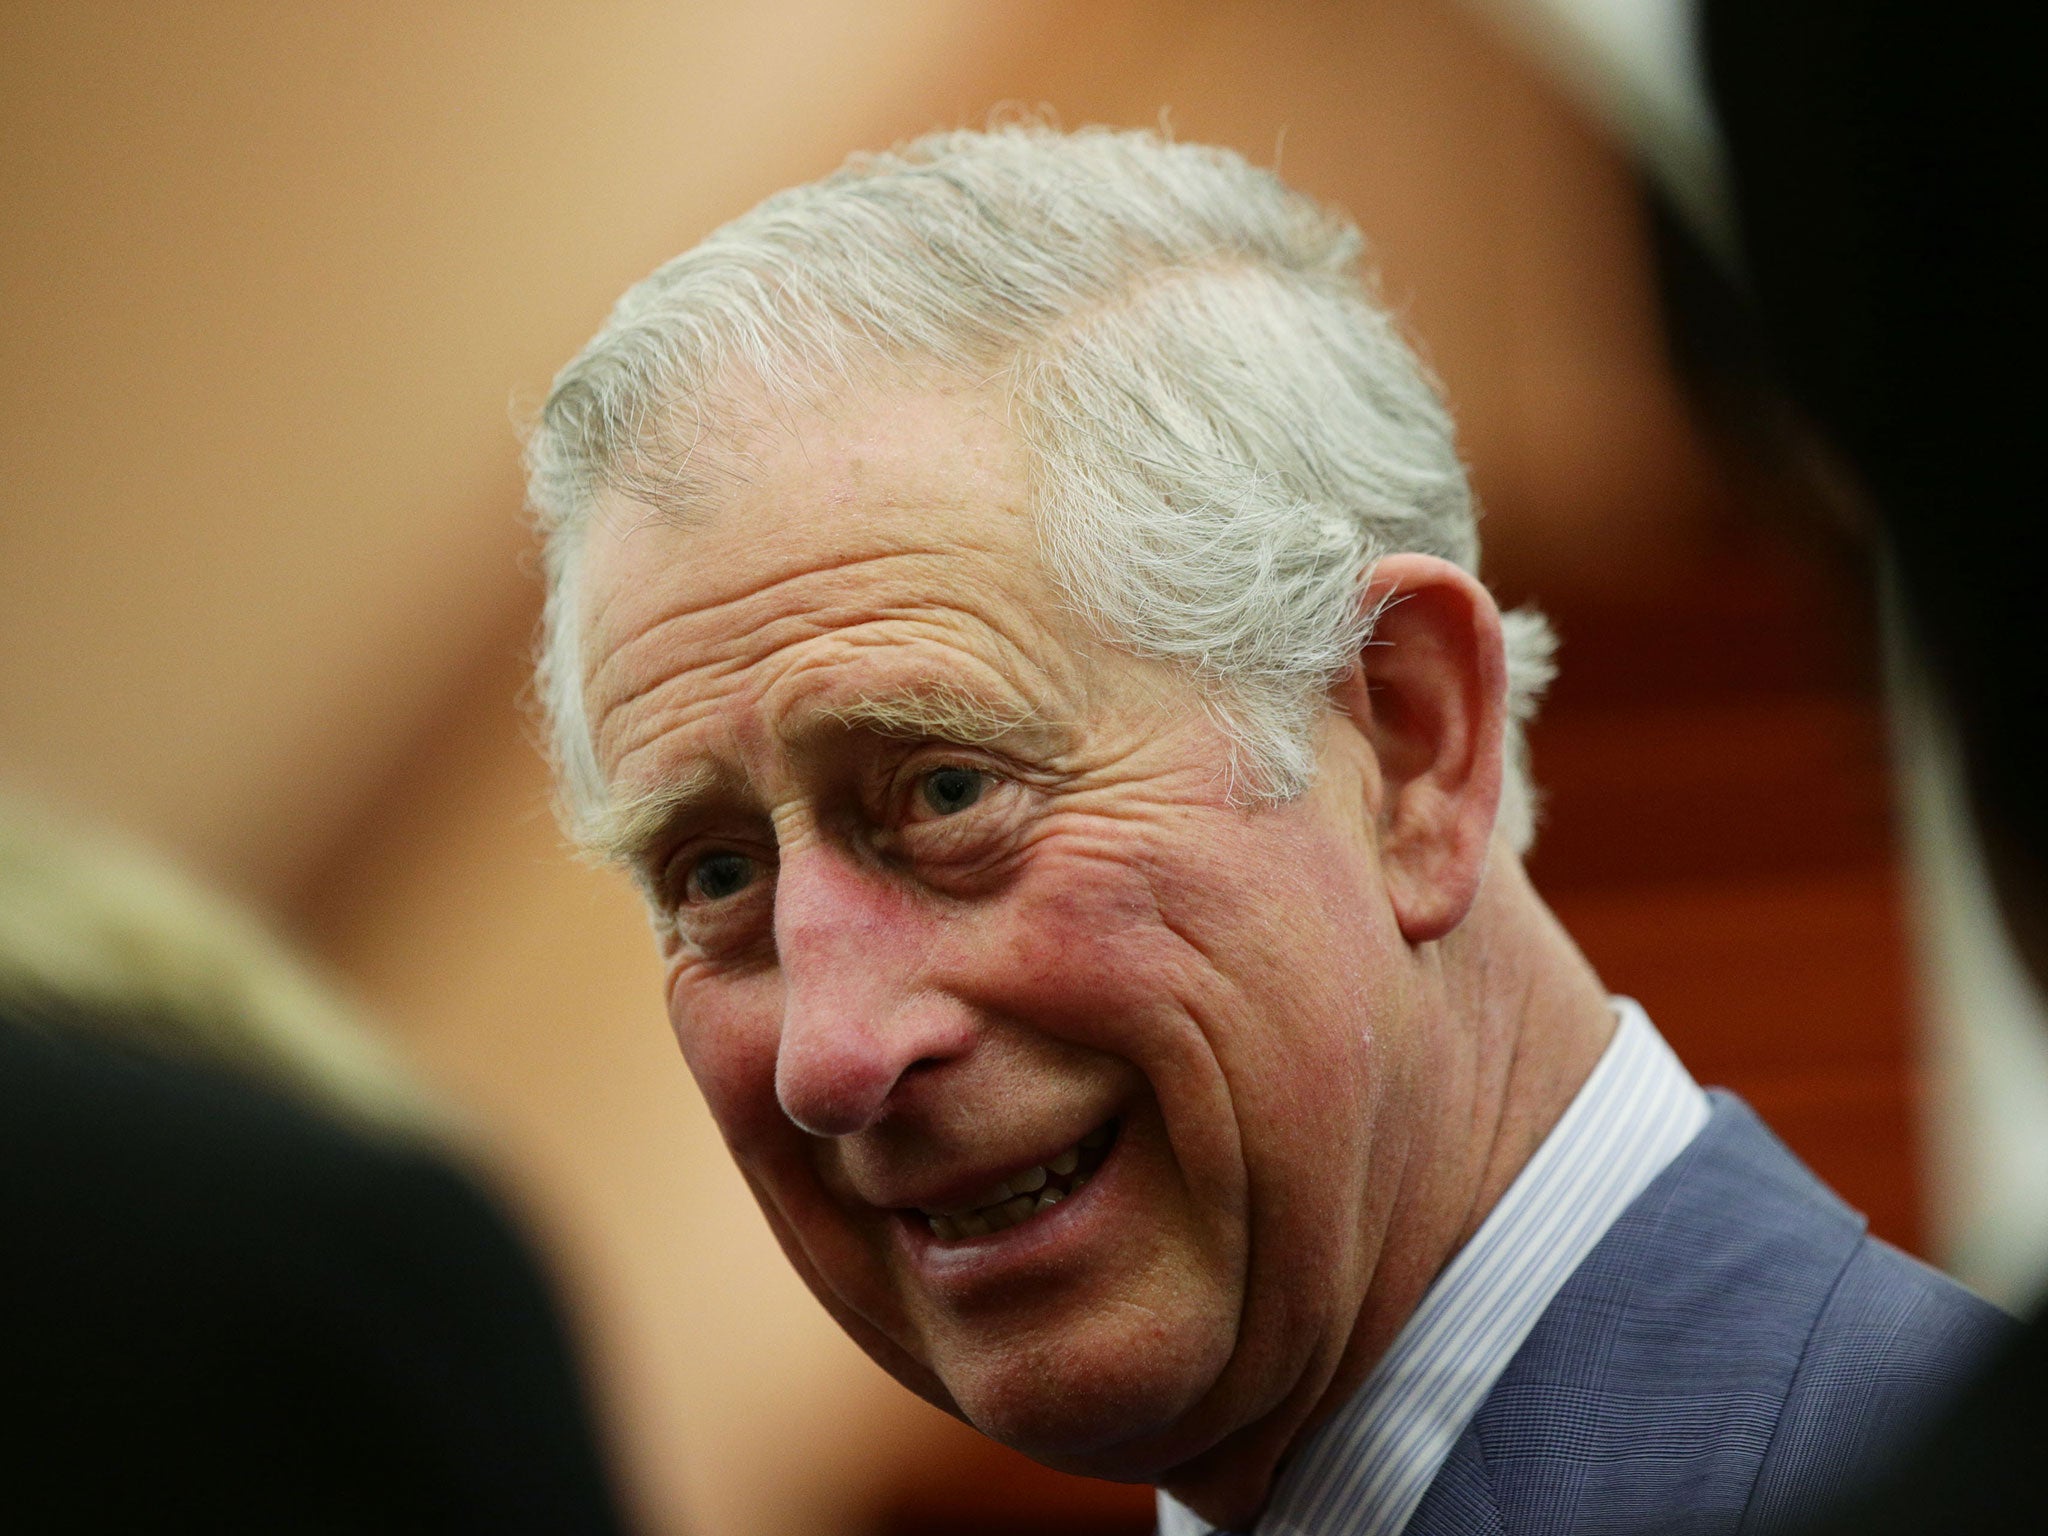 Prince Charles emphasised the need for religious tolerance in his Thought for the Day address